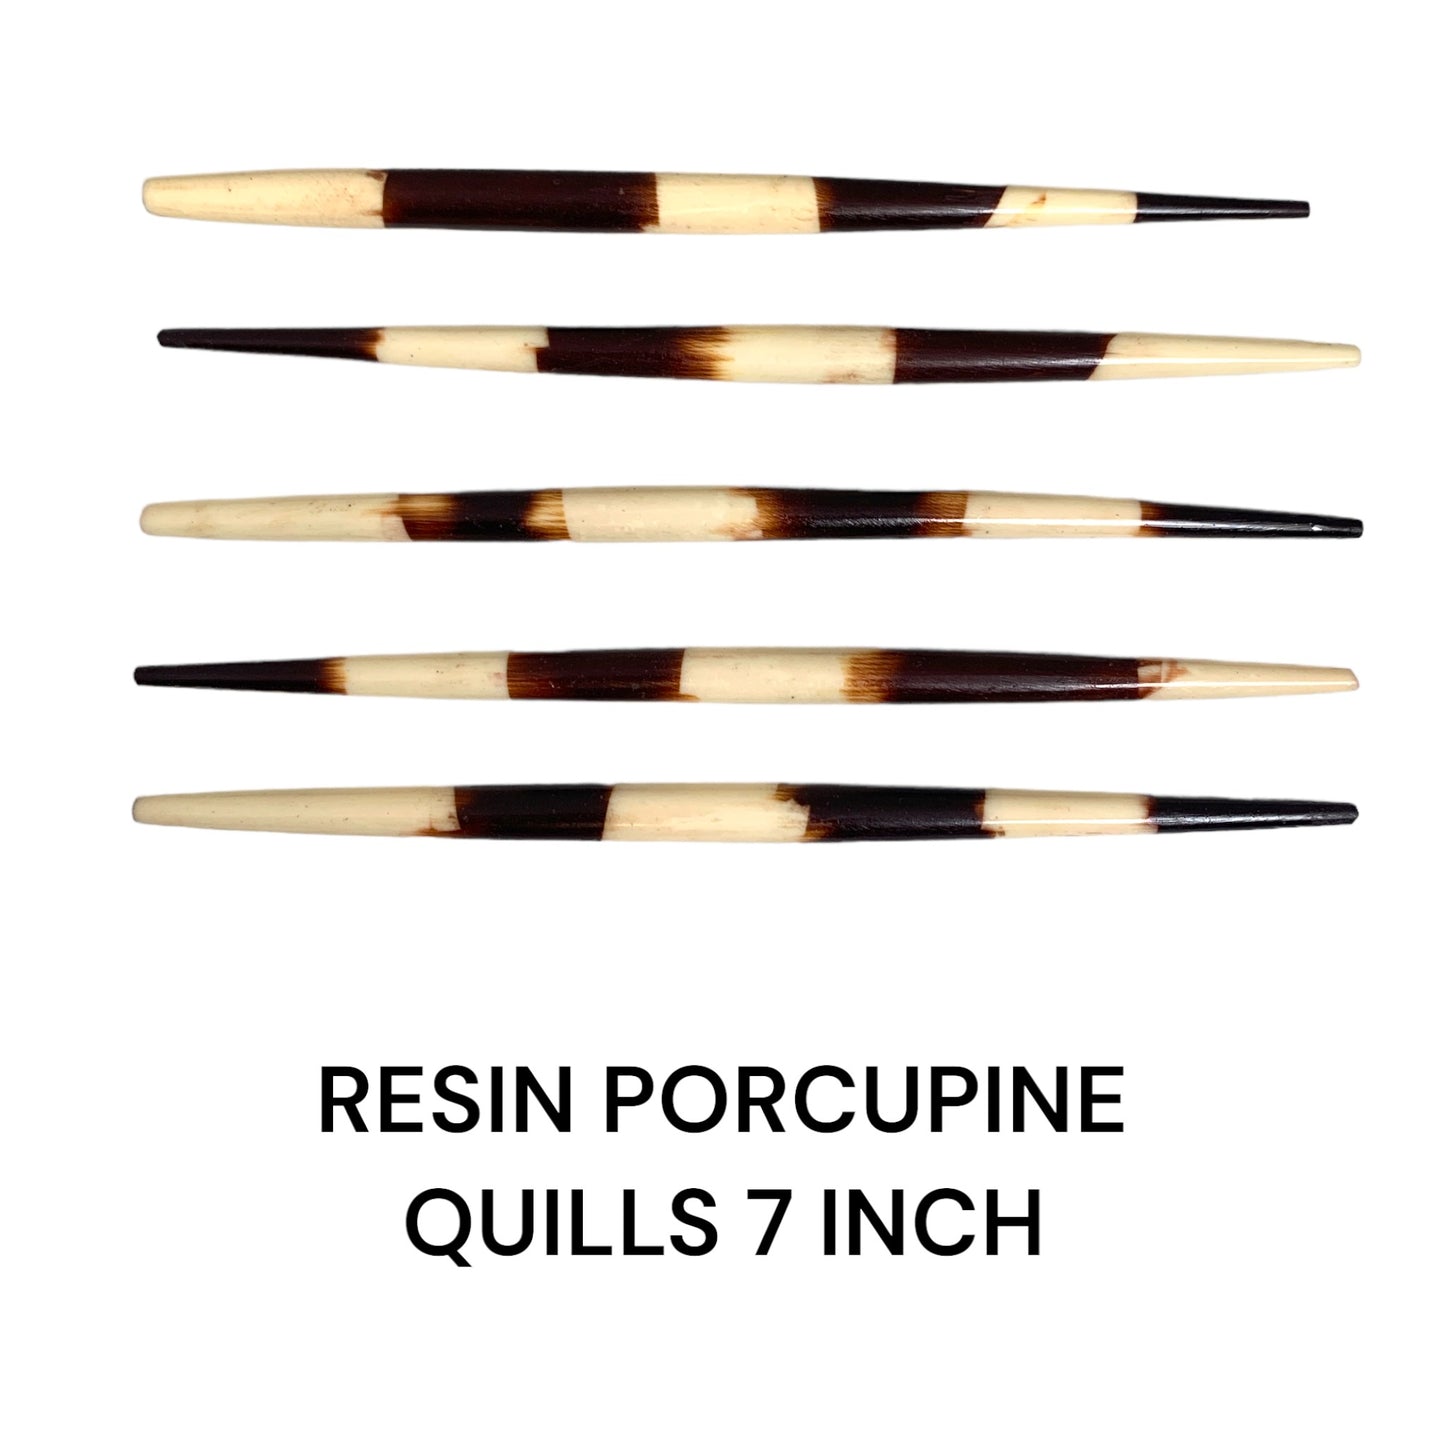 7 inch Resin Porcupine Quill - Premium Quality - Made in India - NEW523